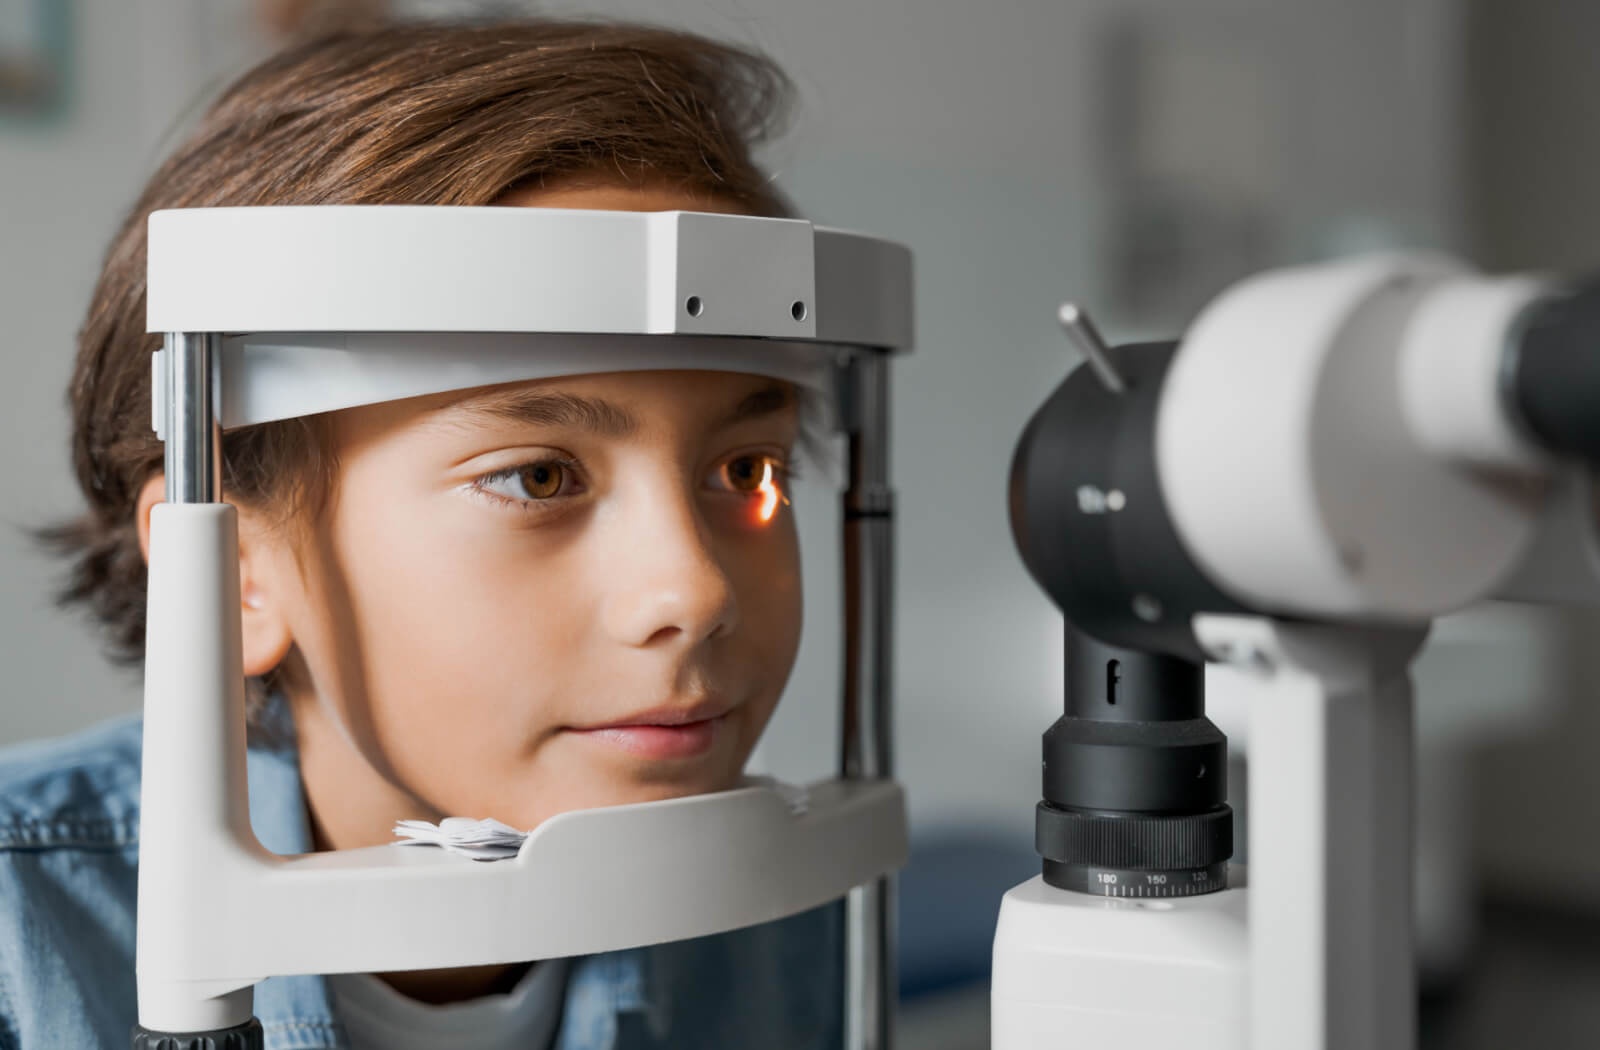 A child has his eyes checked with a slit lamp